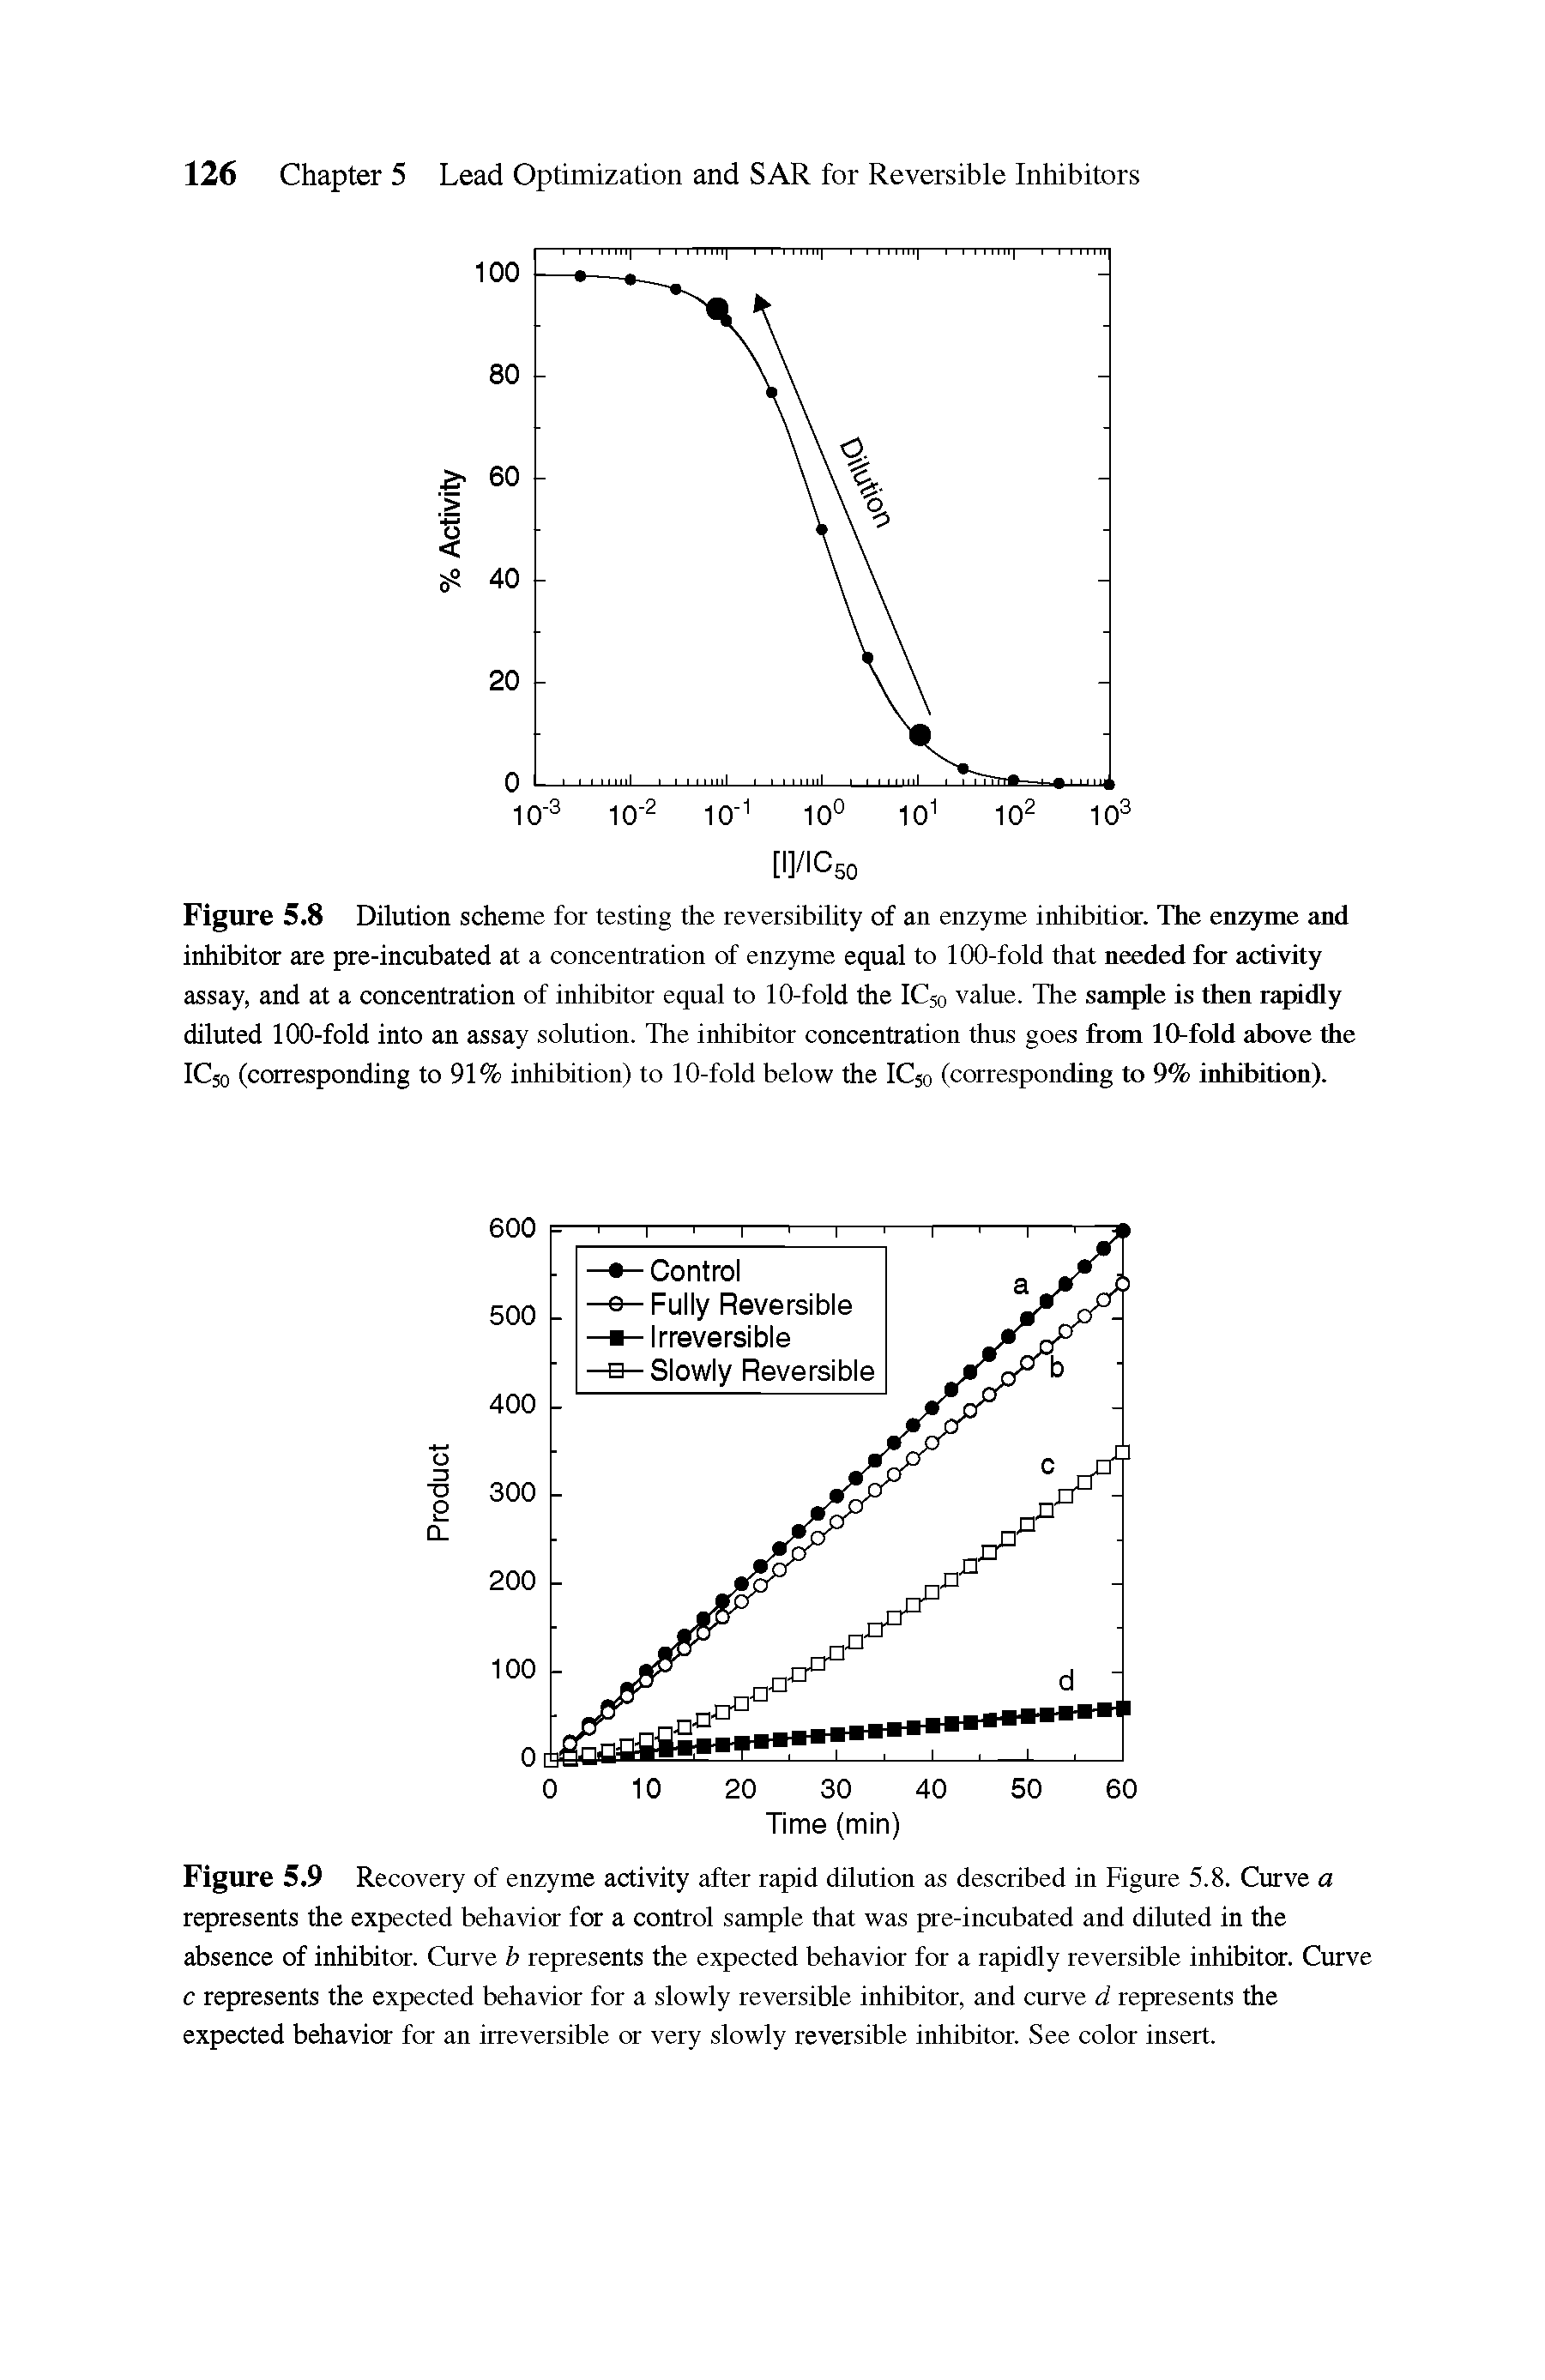 Figure 5.9 Recovery of enzyme activity after rapid dilution as described in Figure 5.8. Curve a represents the expected behavior for a control sample that was pre-incubated and diluted in the absence of inhibitor. Curve b represents the expected behavior for a rapidly reversible inhibitor. Curve c represents the expected behavior for a slowly reversible inhibitor, and curve d represents the expected behavior for an irreversible or very slowly reversible inhibitor. See color insert.